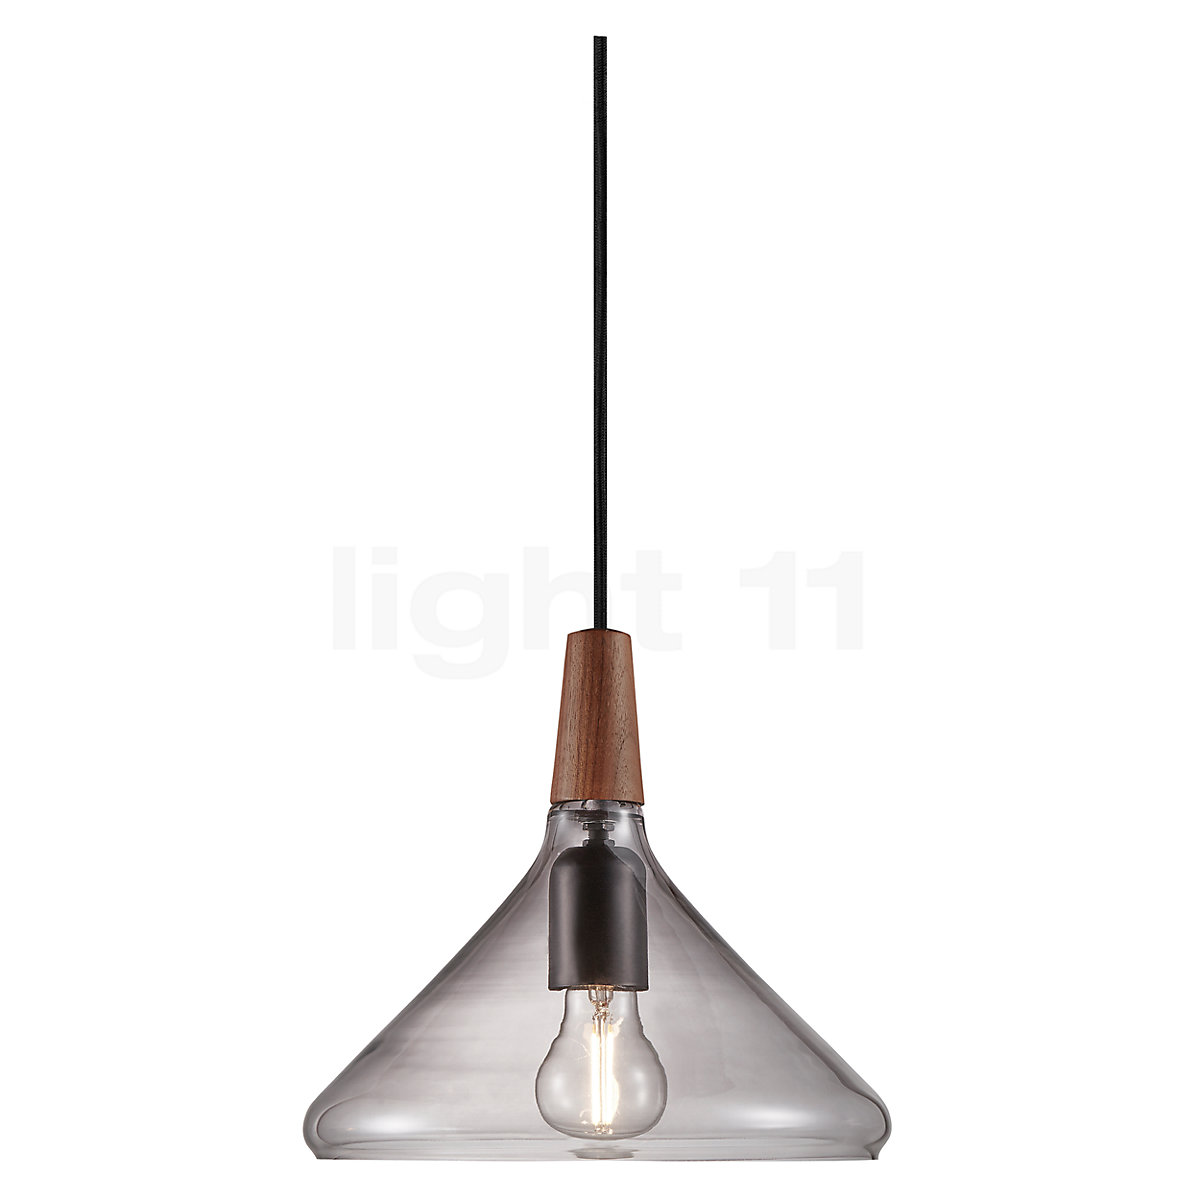 Buy Design for the People Nori Pendant Light at